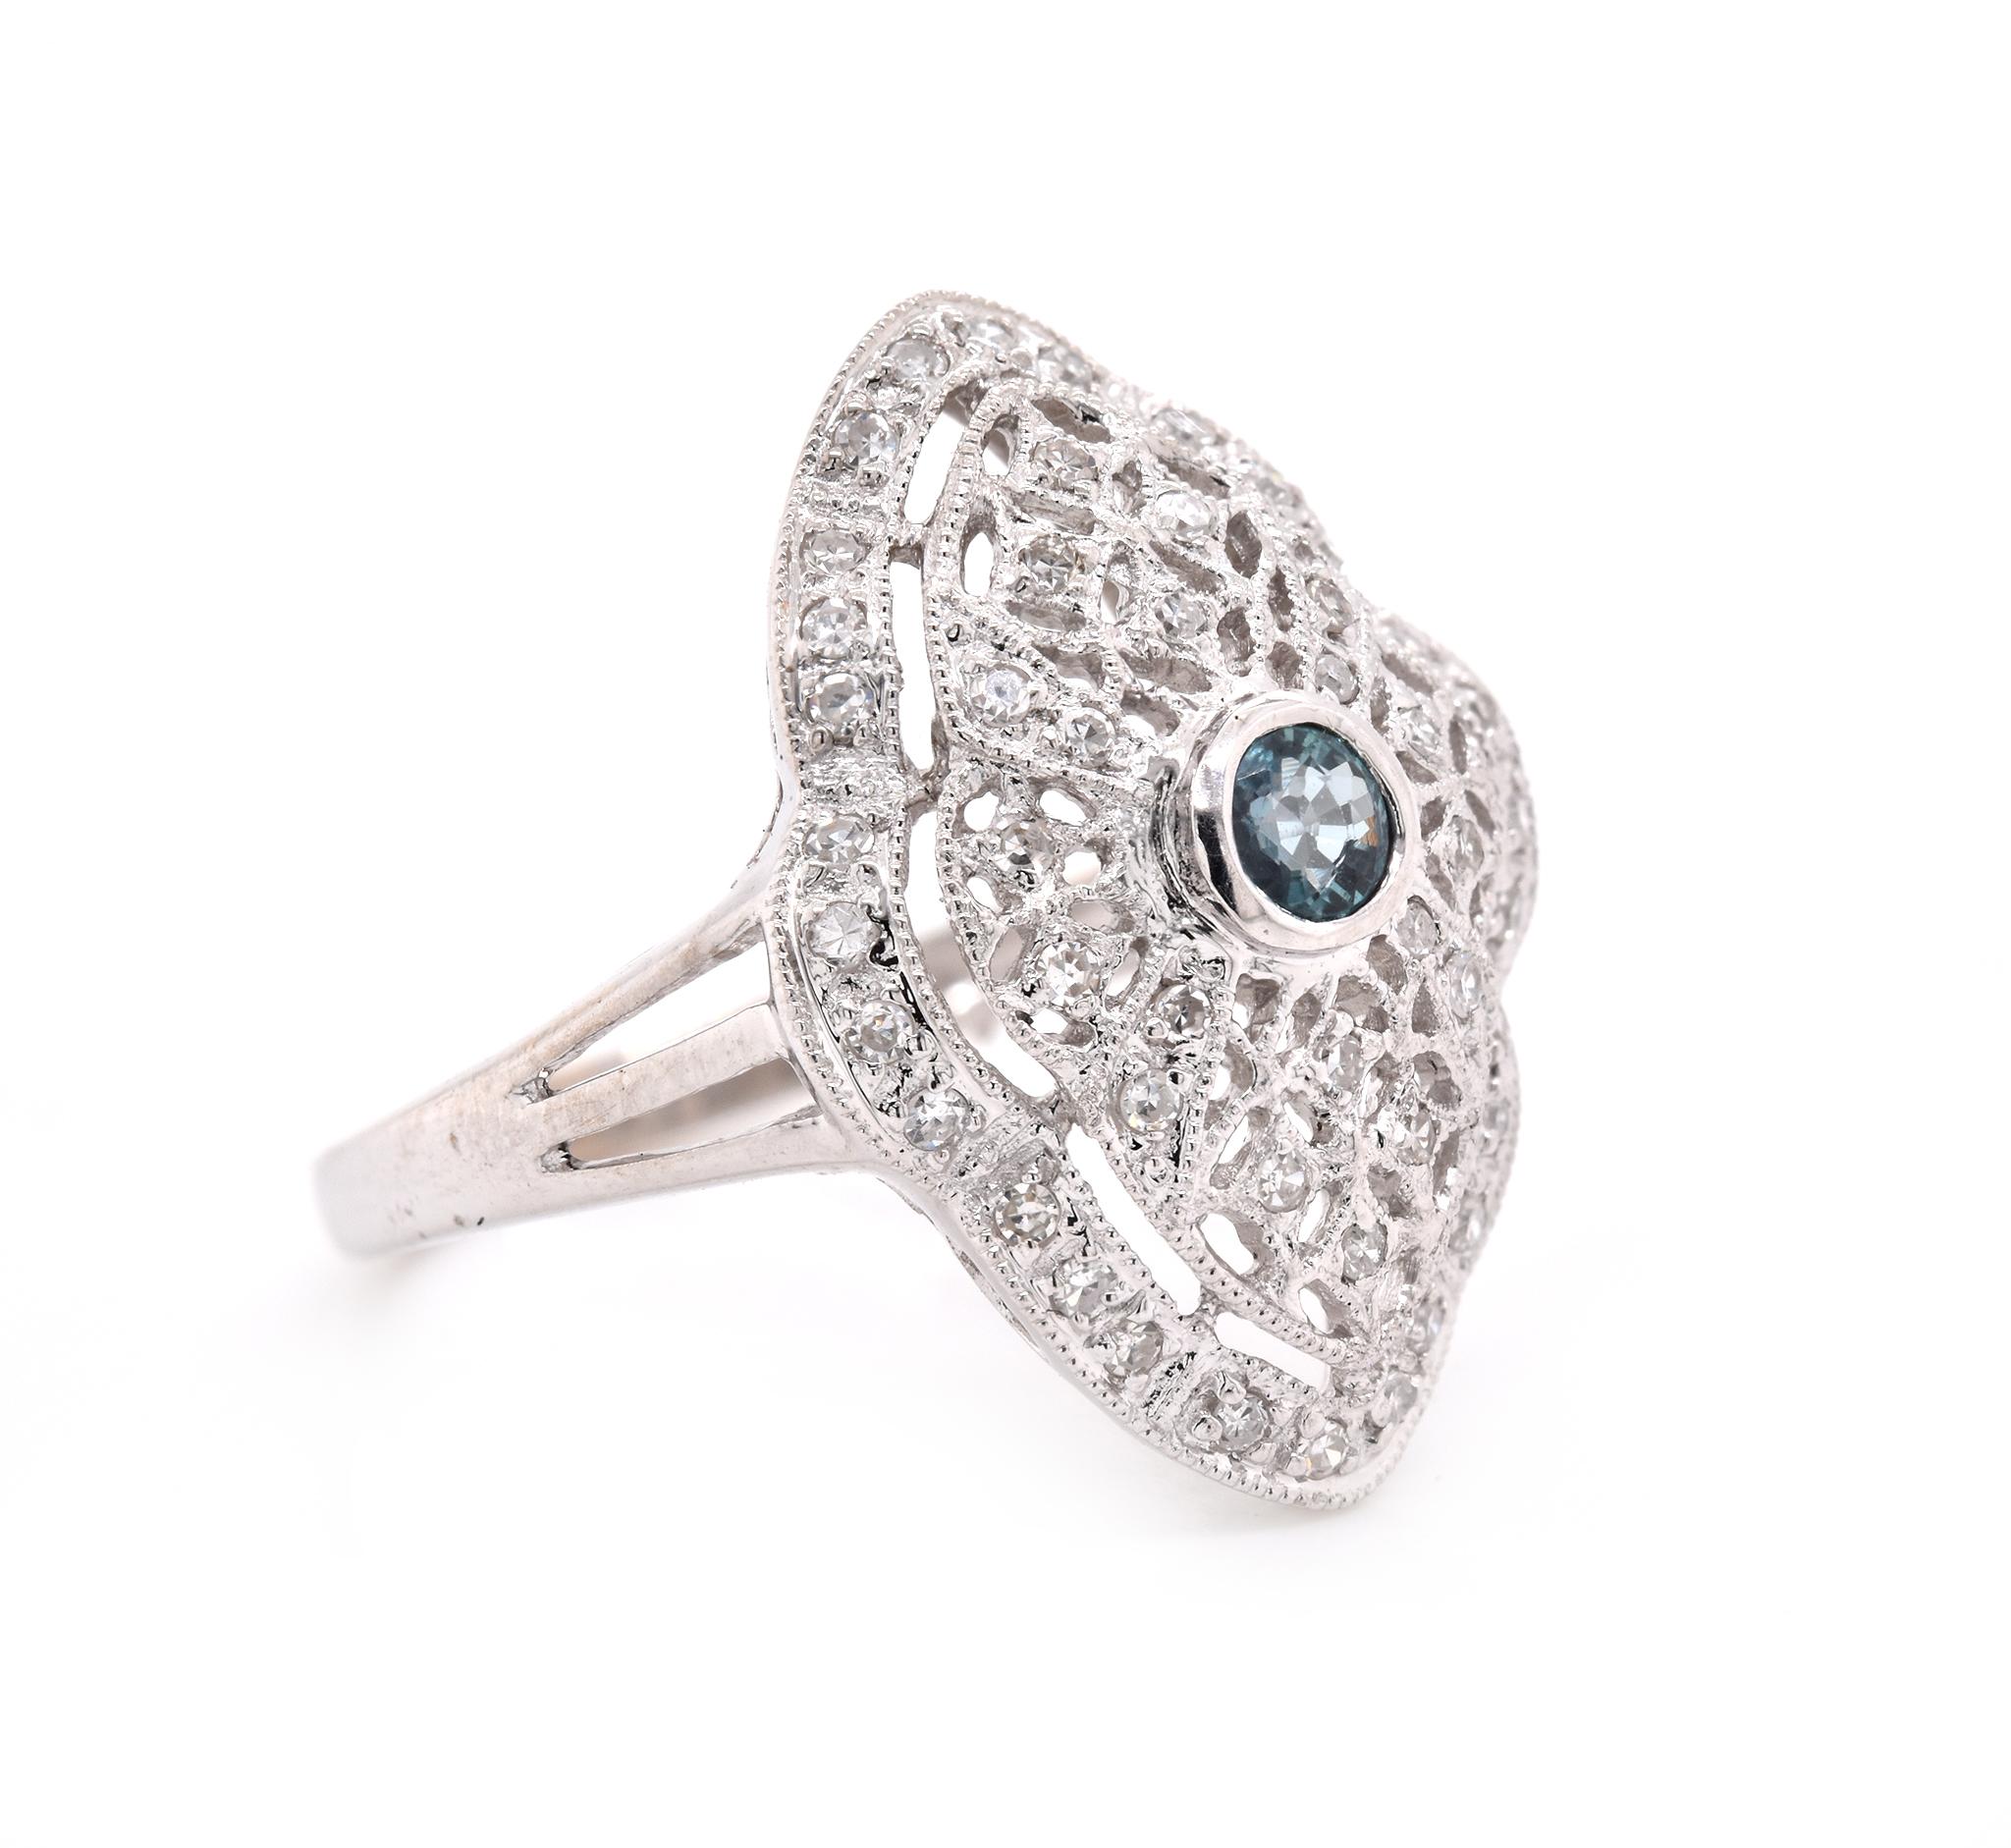 Designer: custom
Material: 14K white gold 
Alexandrite: 1 round cut = .13ct
Diamond: 48 round cut = .25cttw
Color: G
Clarity: VS
Ring Size: 6.25 (please allow up to 2 additional business days for sizing requests)
Dimensions: ring shank measures